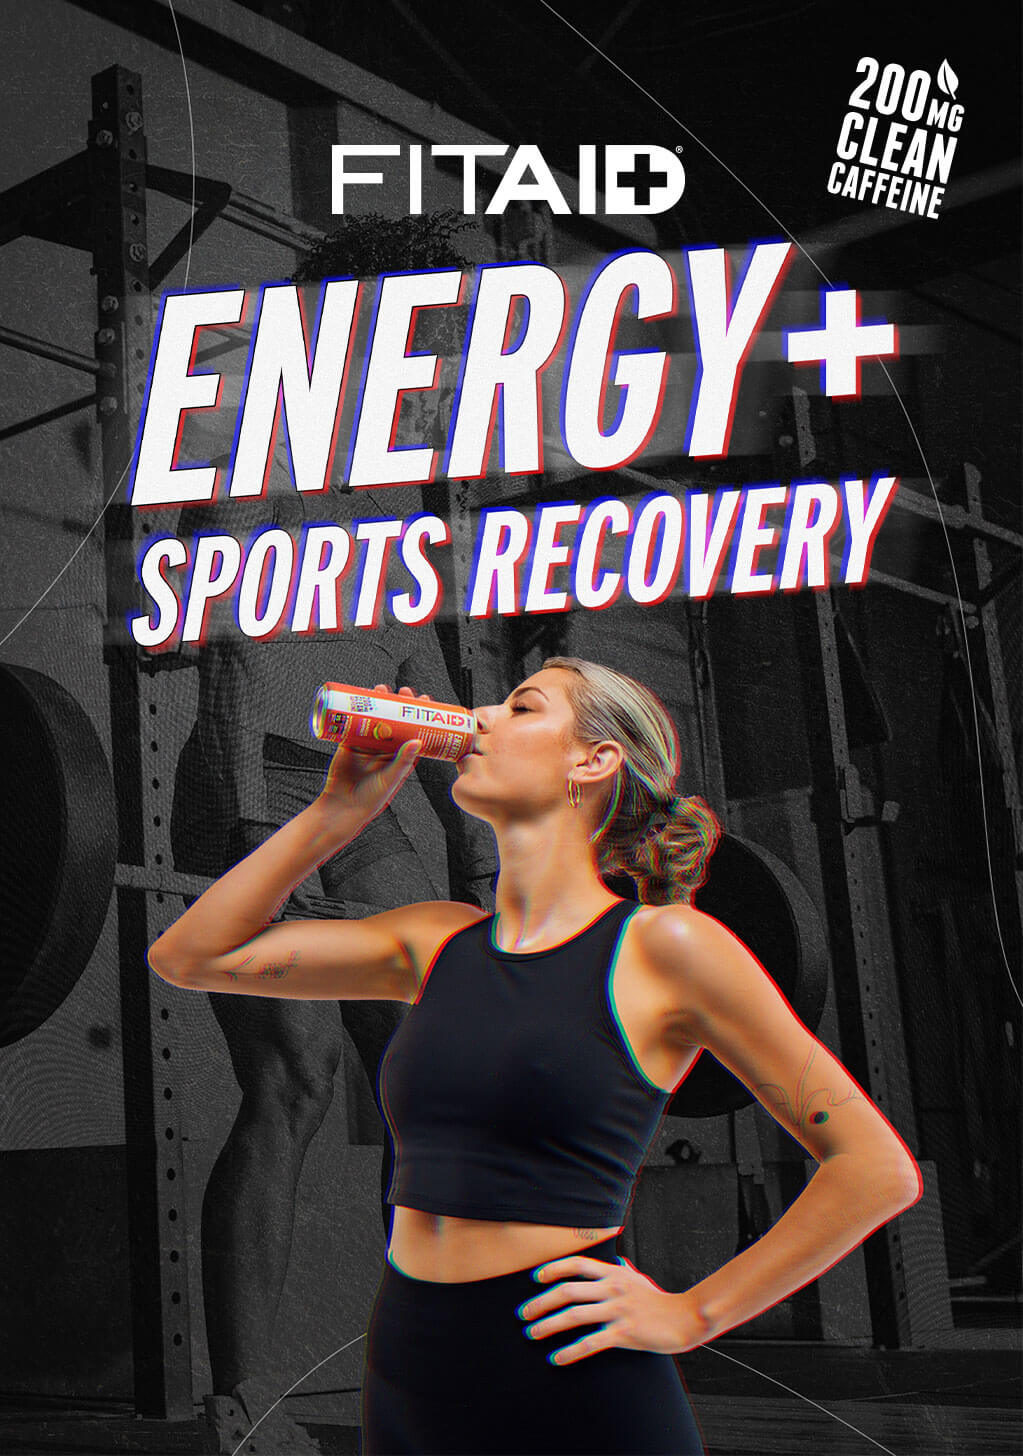 FITAID Energy Recharge & Recover